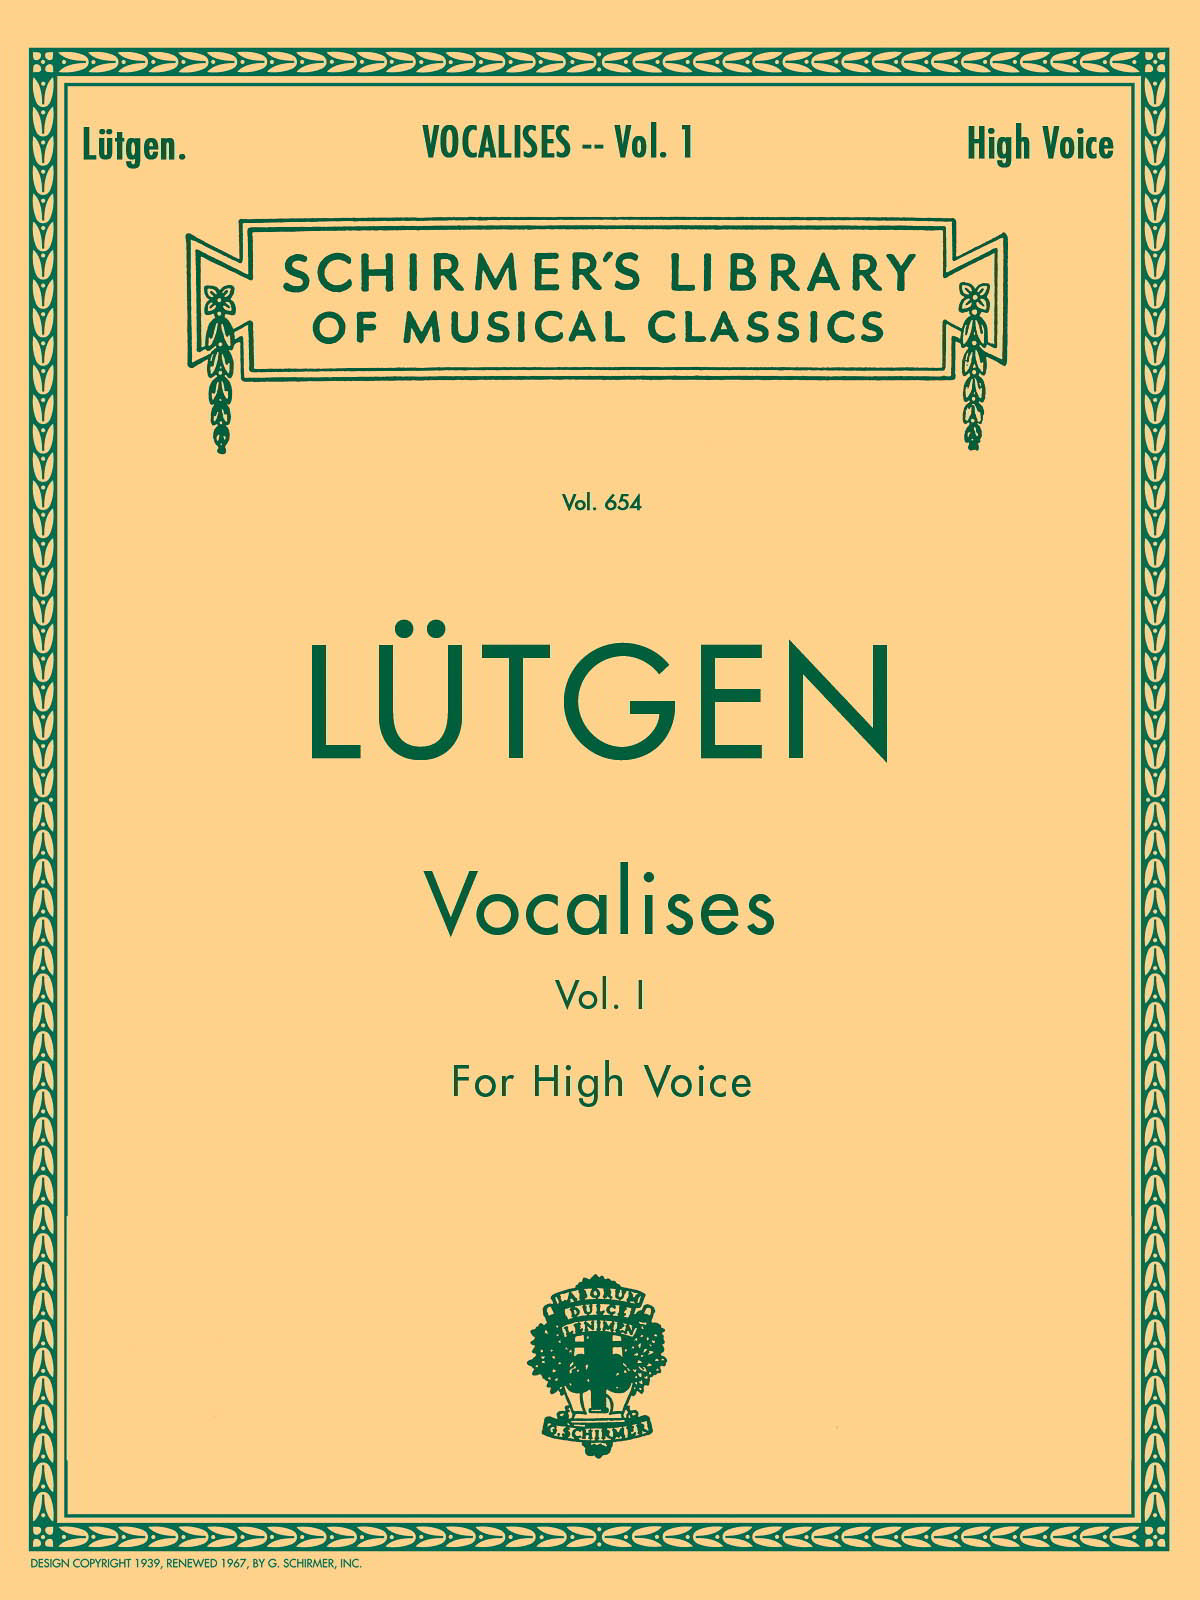 Lutgen: Vocalises Book 1 (High Voice)- 20 Daily Exercises published by Schirmer